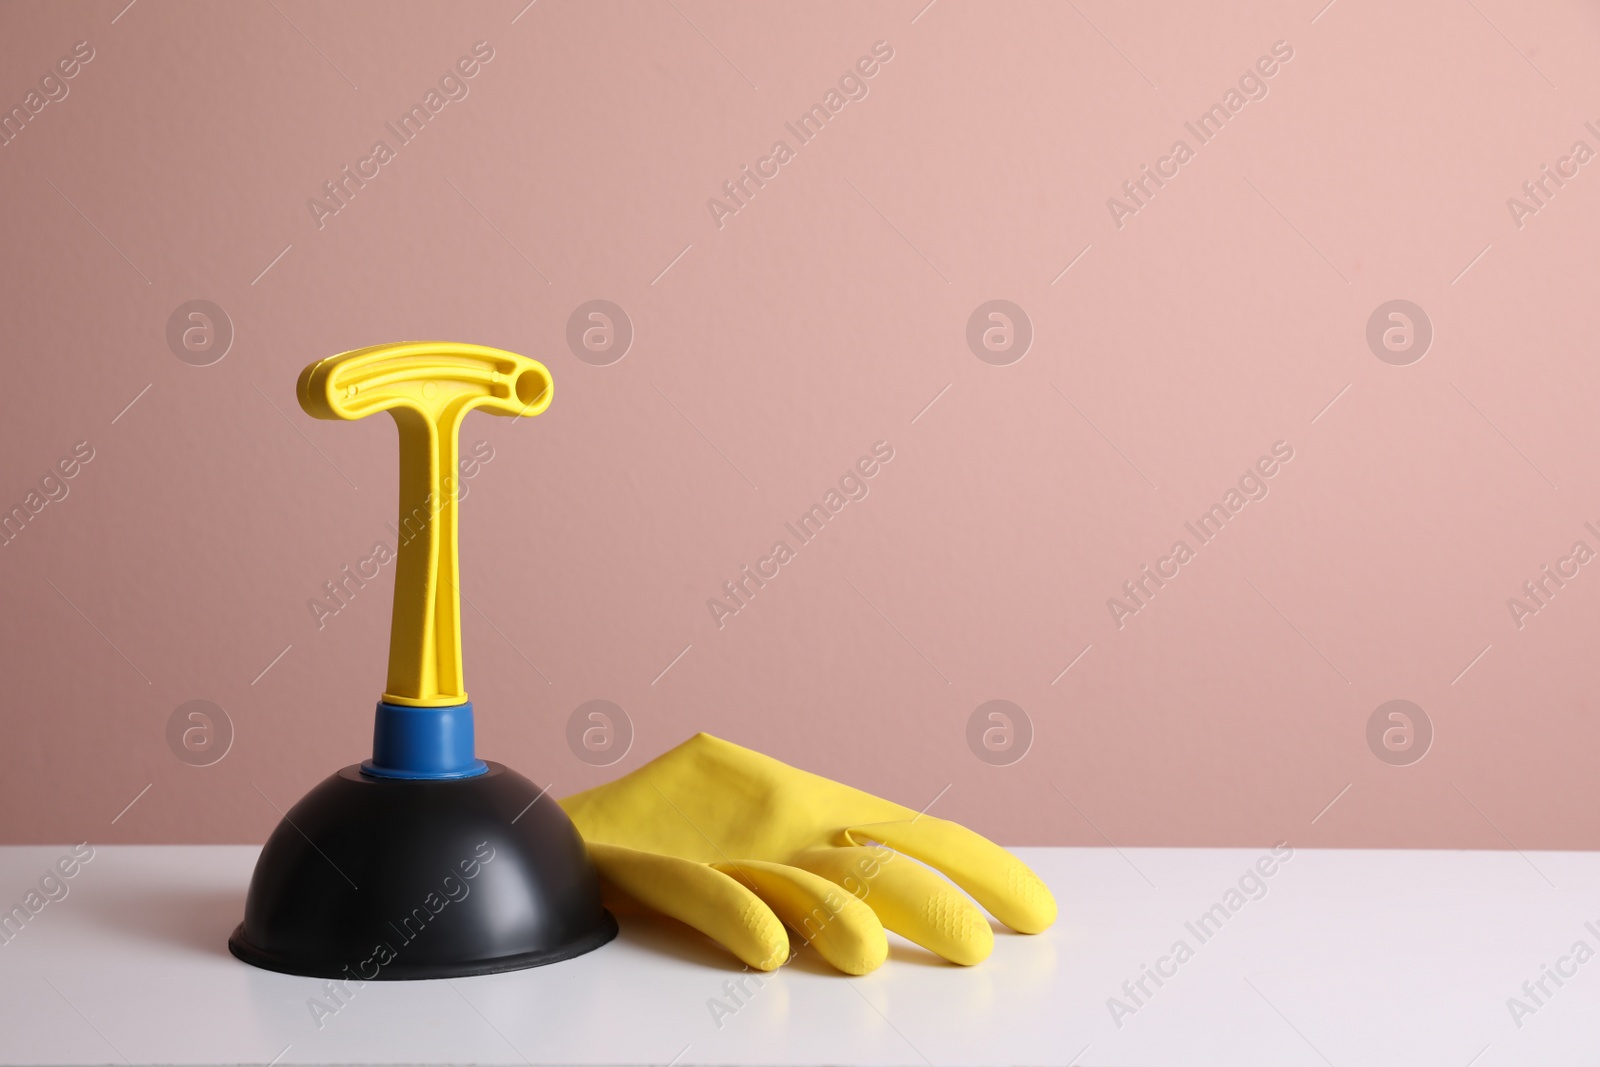 Photo of Plunger and rubber glove on white table against pink background. Space for text